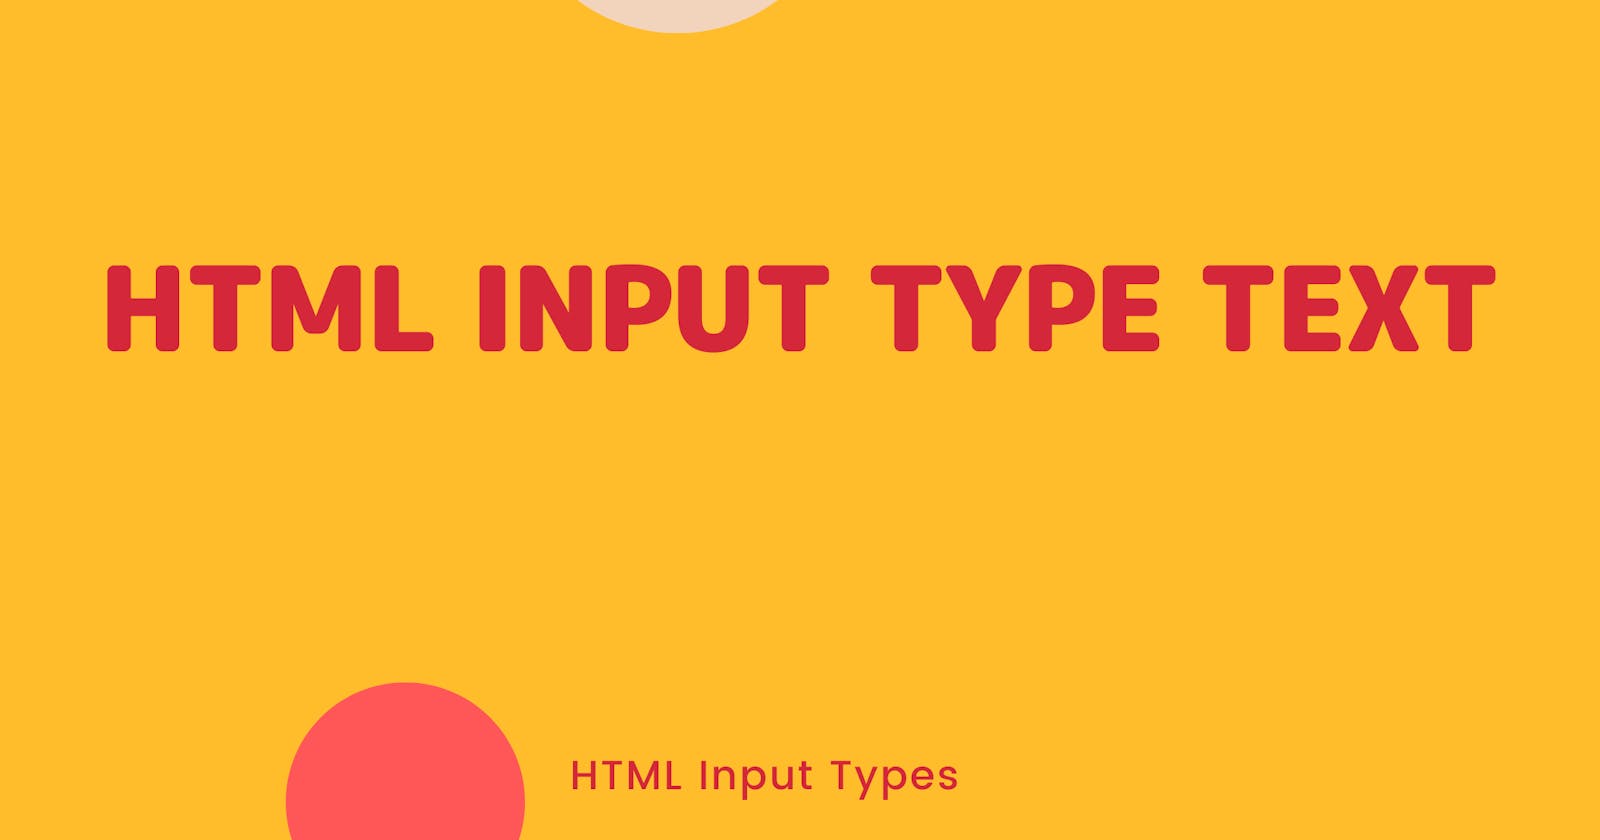 What is HTML Input Type Text?